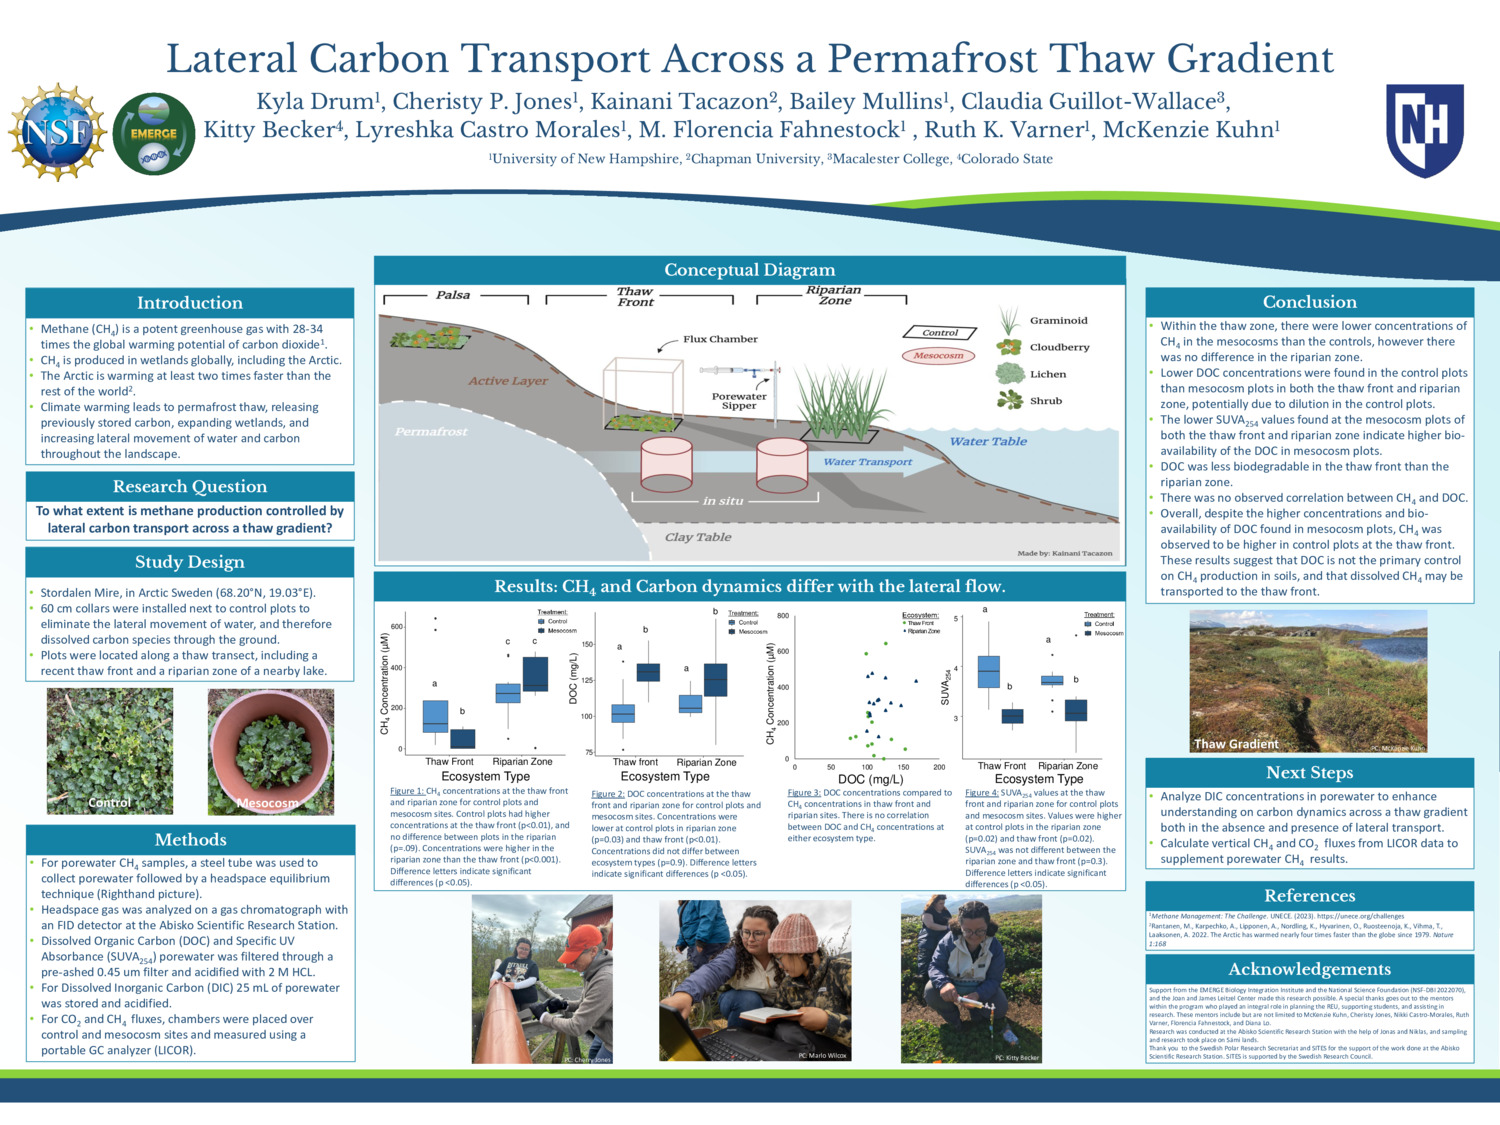 Lateral Carbon Transport Across A Permafrost Thaw Gradient by mfmprado